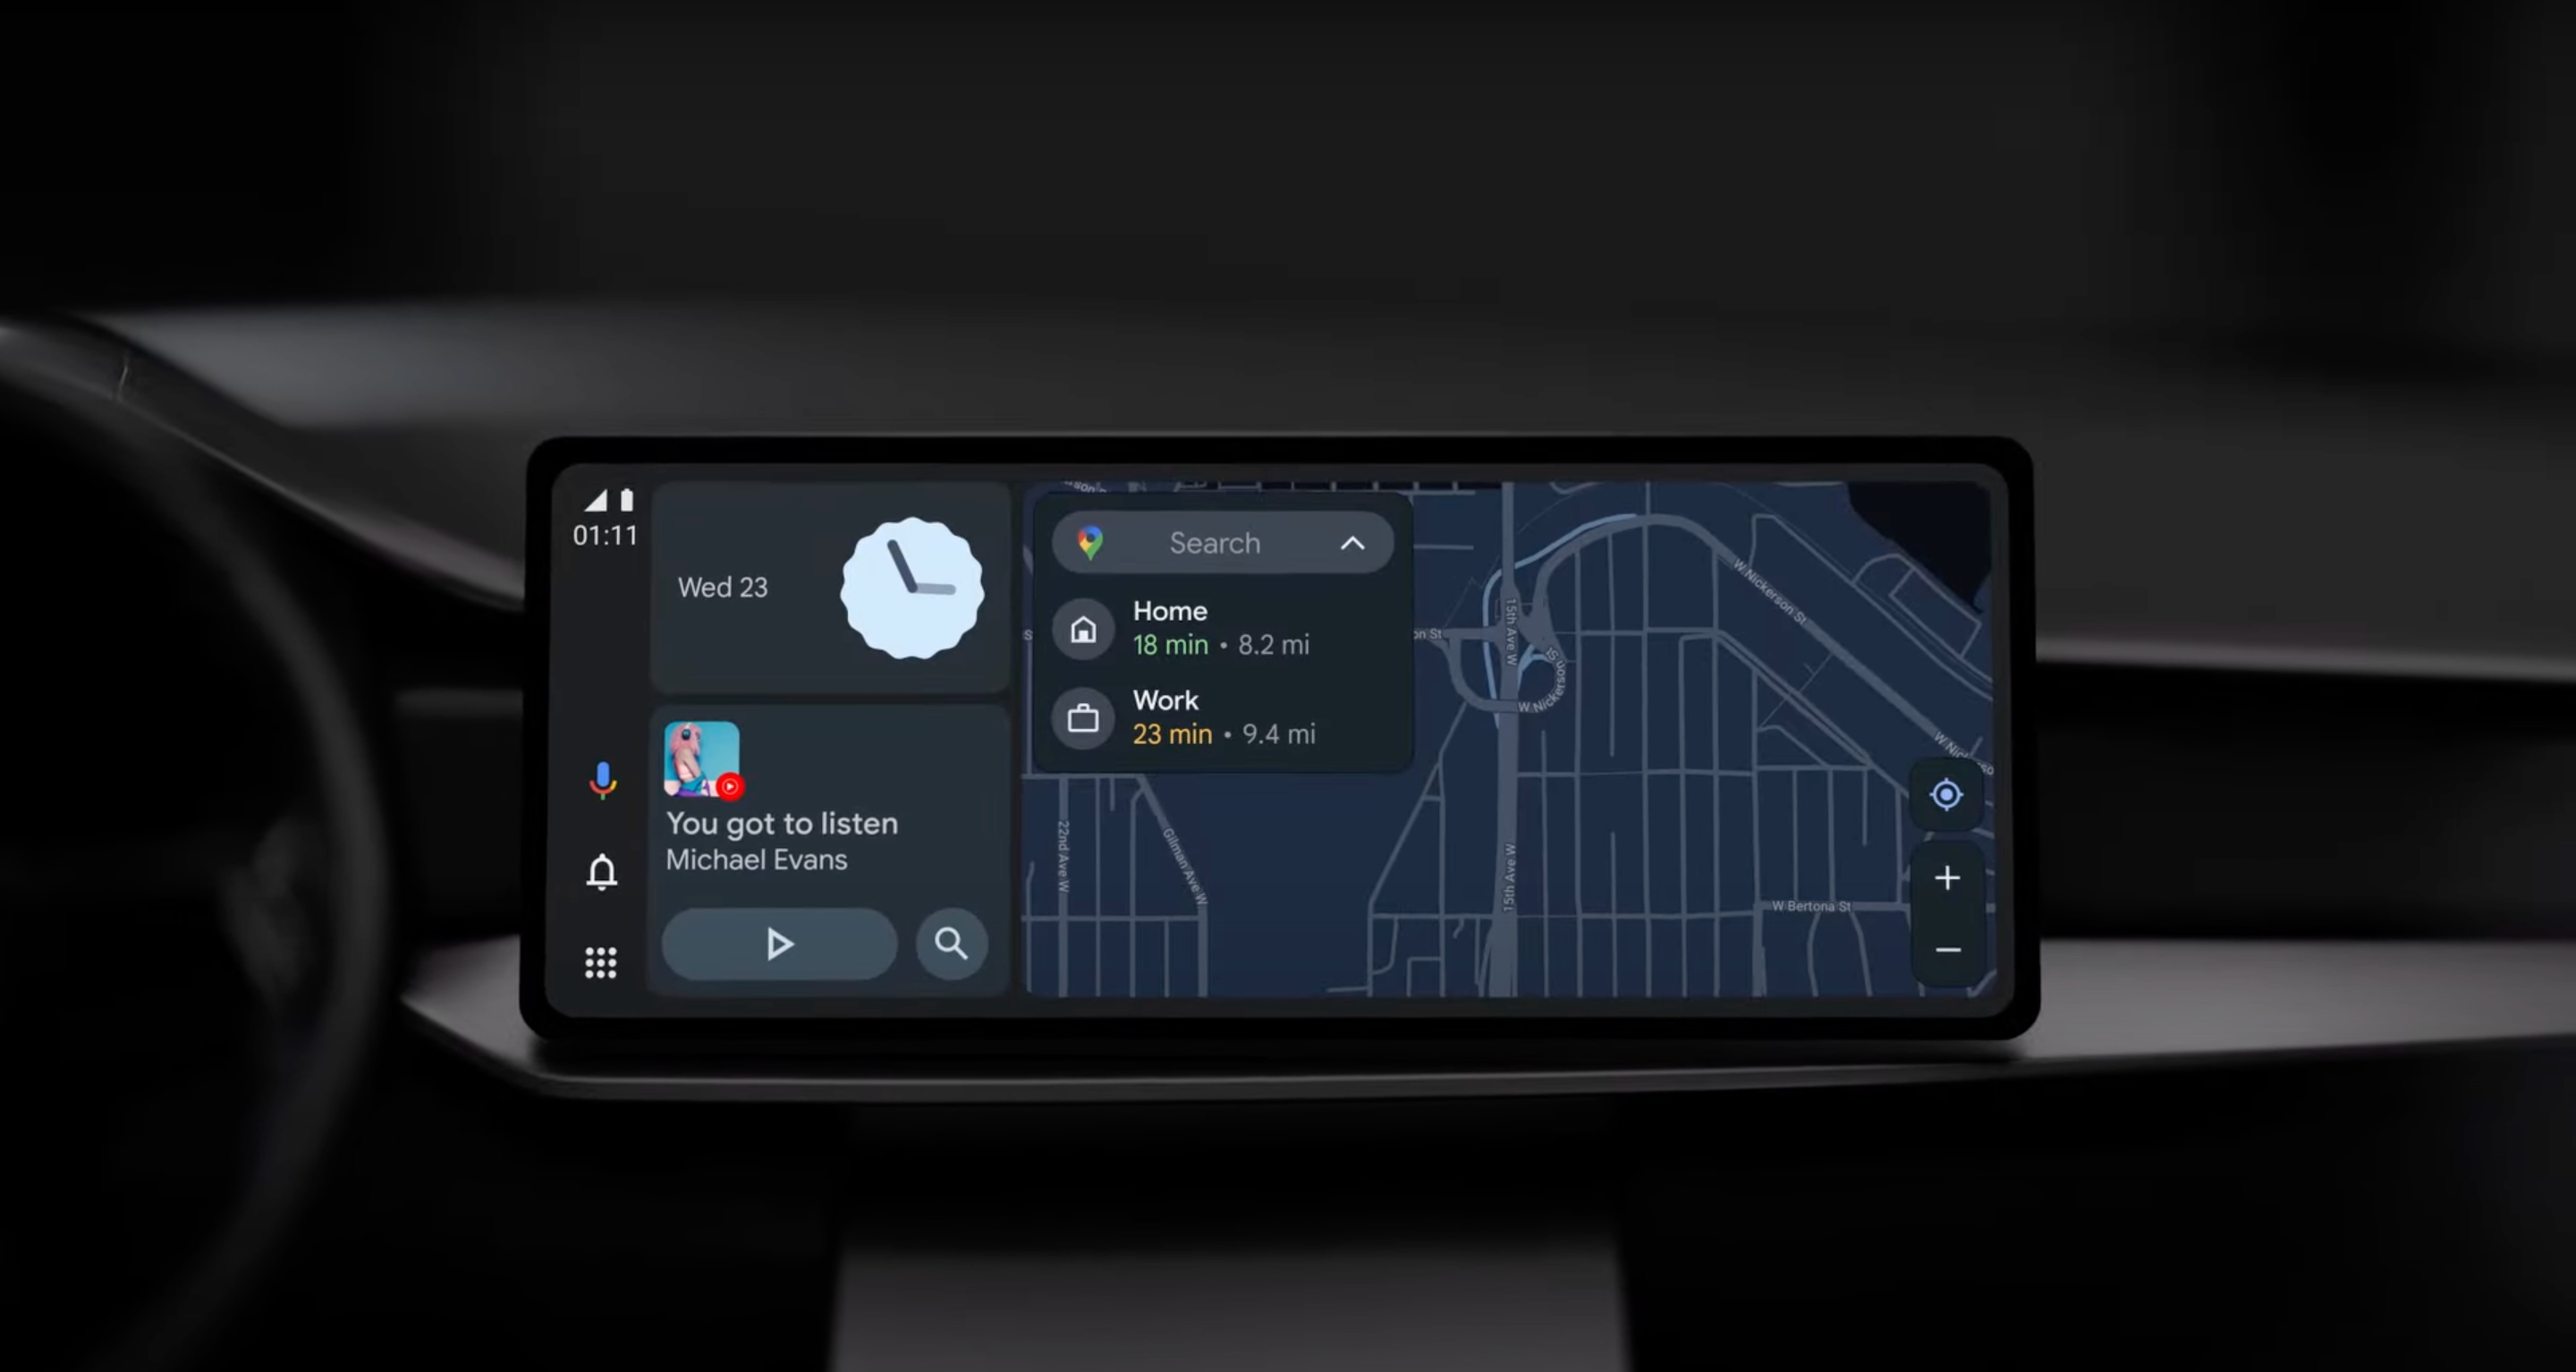 Google introduced a new version of Android Auto